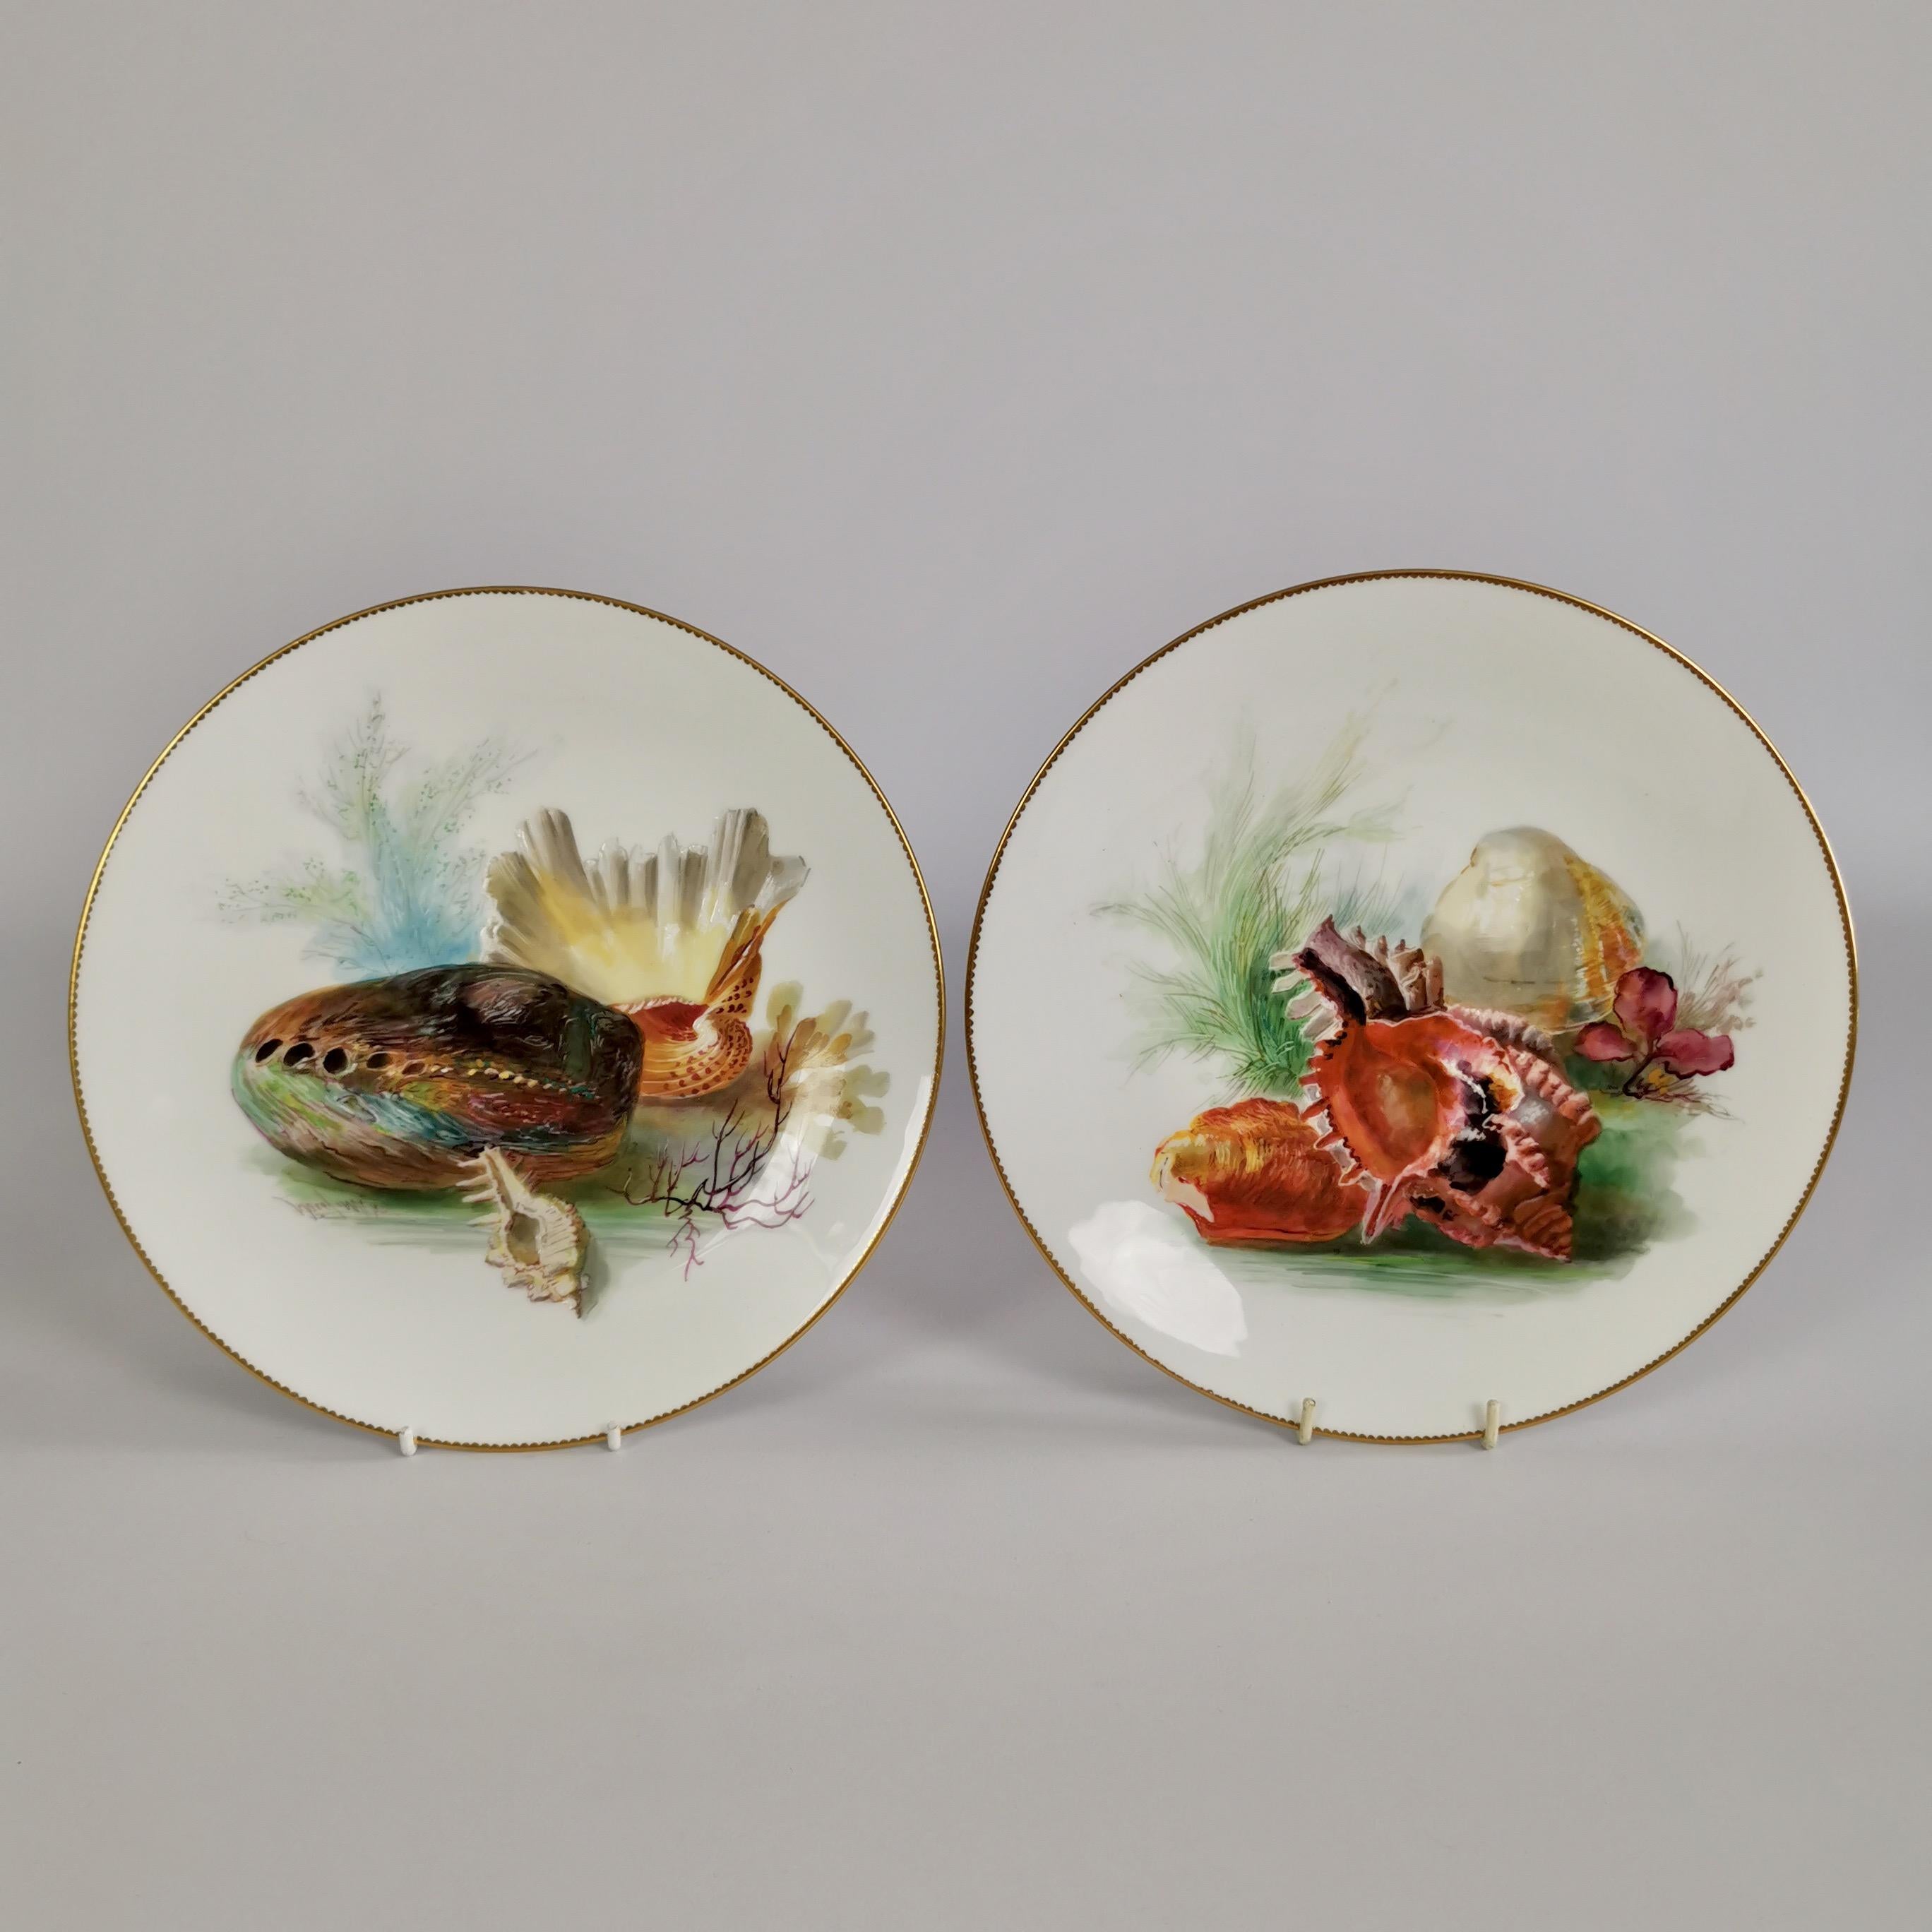 This is a rare and beautiful plate made by Minton in 1891 and painted by the famous porcelain artist Wenceslas (William) Mussill. The plate has an aquatic scene with sea shells in the centre and would have belonged to a large dessert